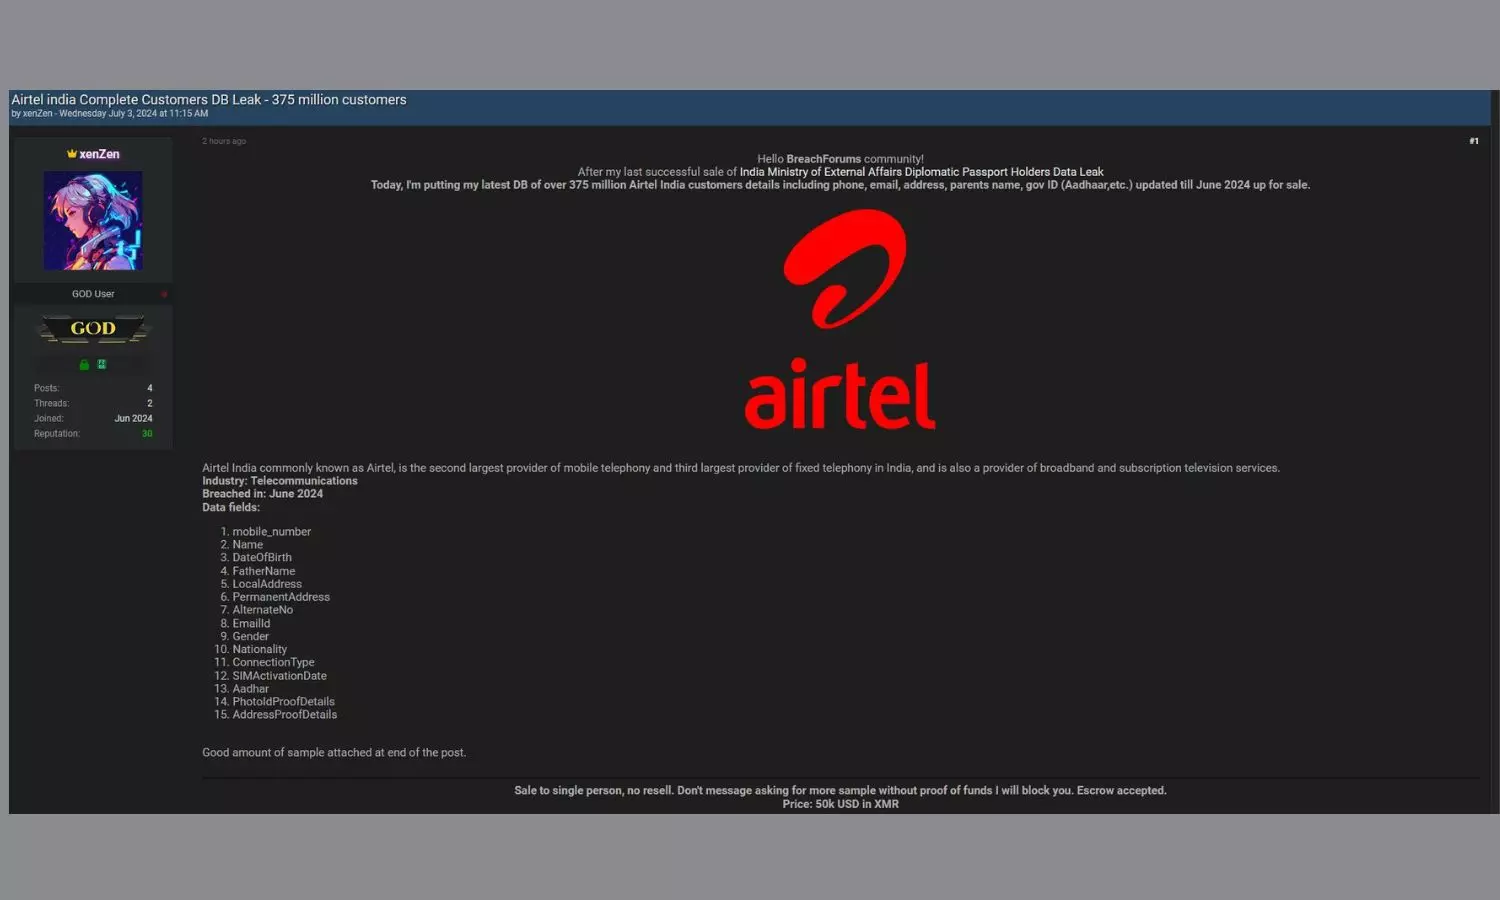 Over 375 million Airtel India users data breached: Claims Hacker